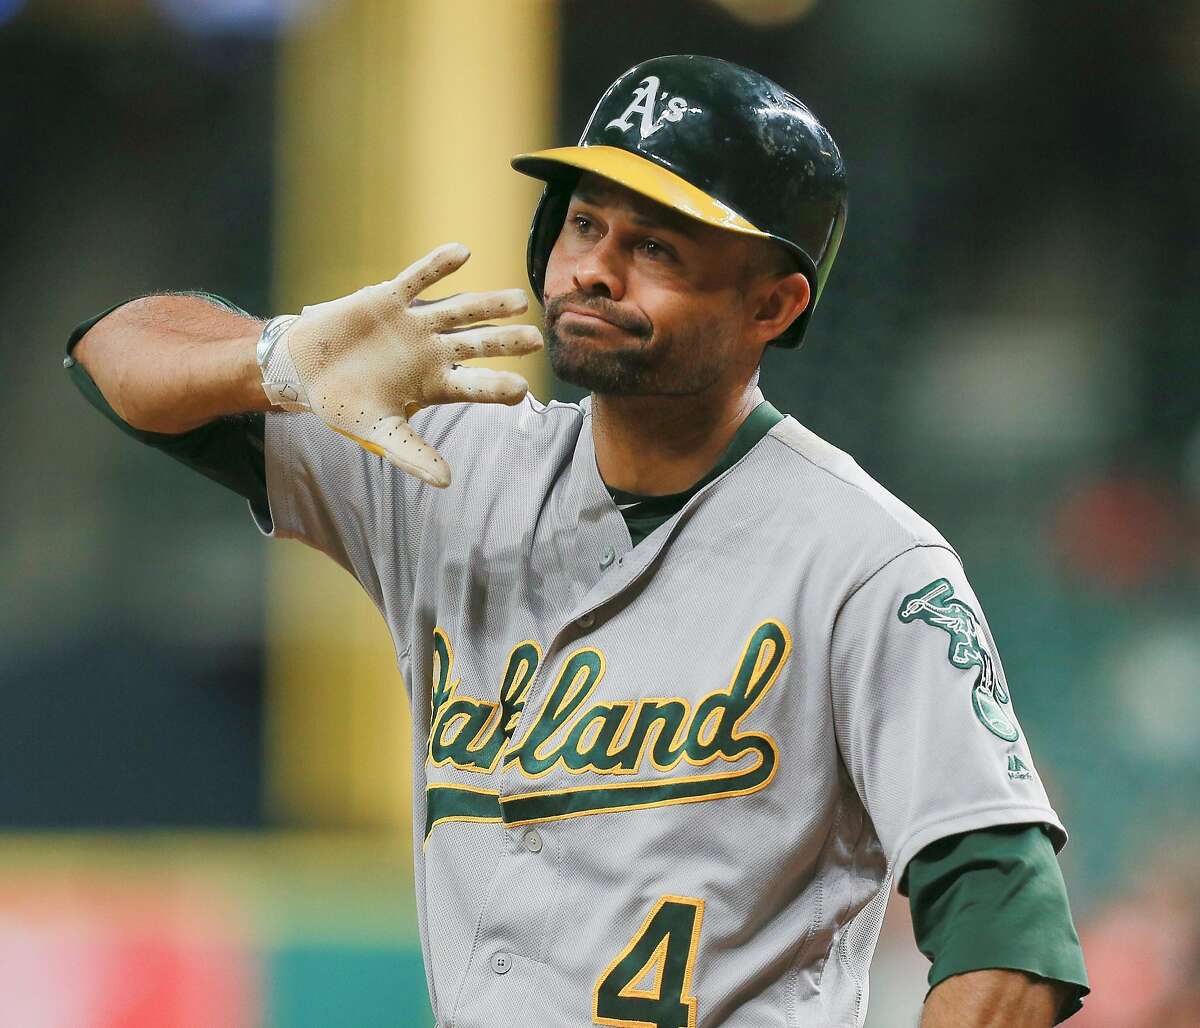 Coco Crisp was traded to the Indians on Wednesday for a minor league pitcher.